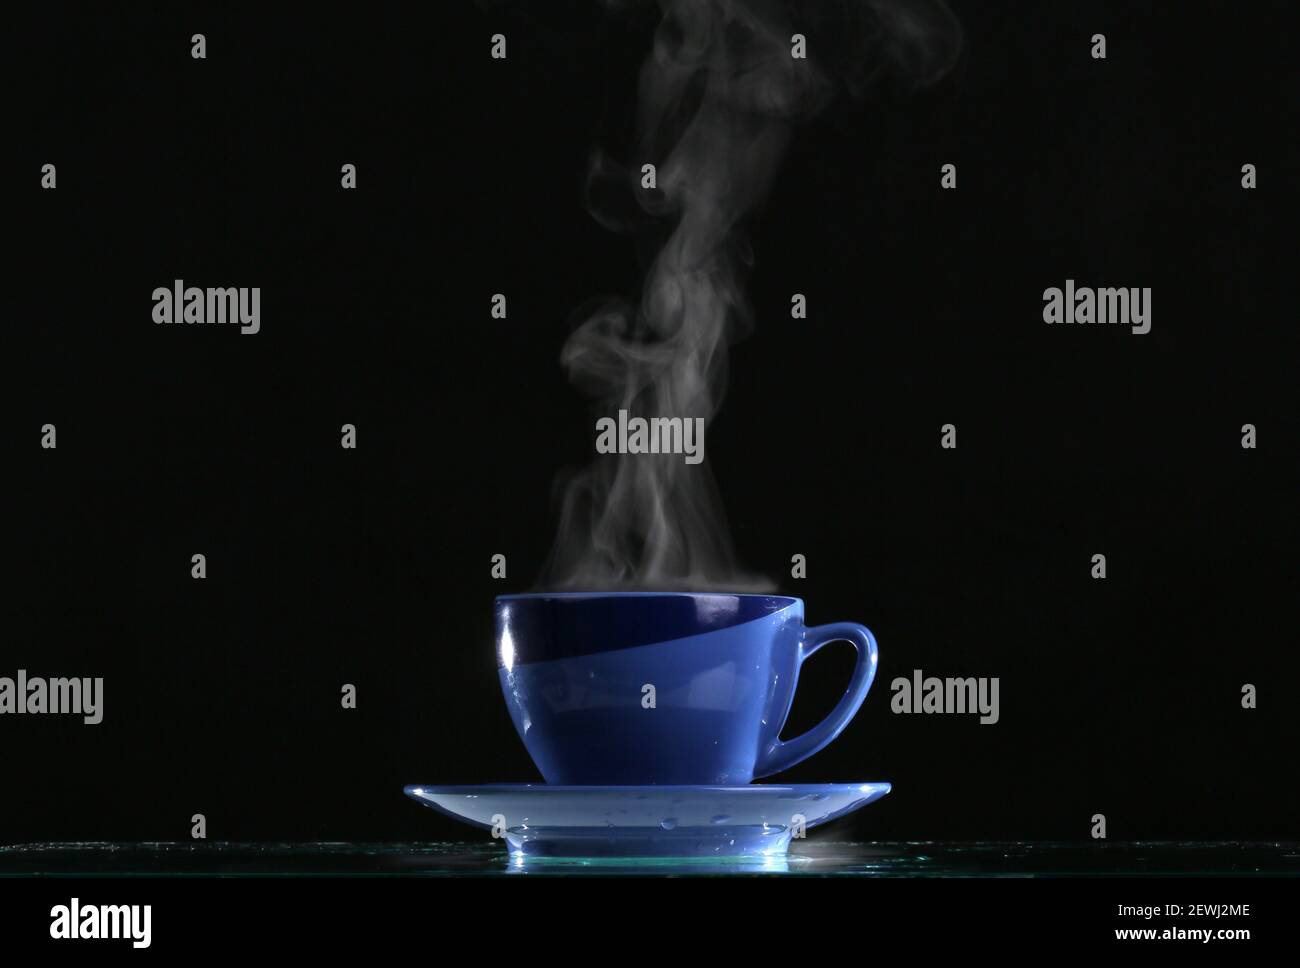 https://c8.alamy.com/comp/2EWJ2ME/pouring-very-hot-water-into-a-cup-against-a-black-background-and-splashing-water-2EWJ2ME.jpg